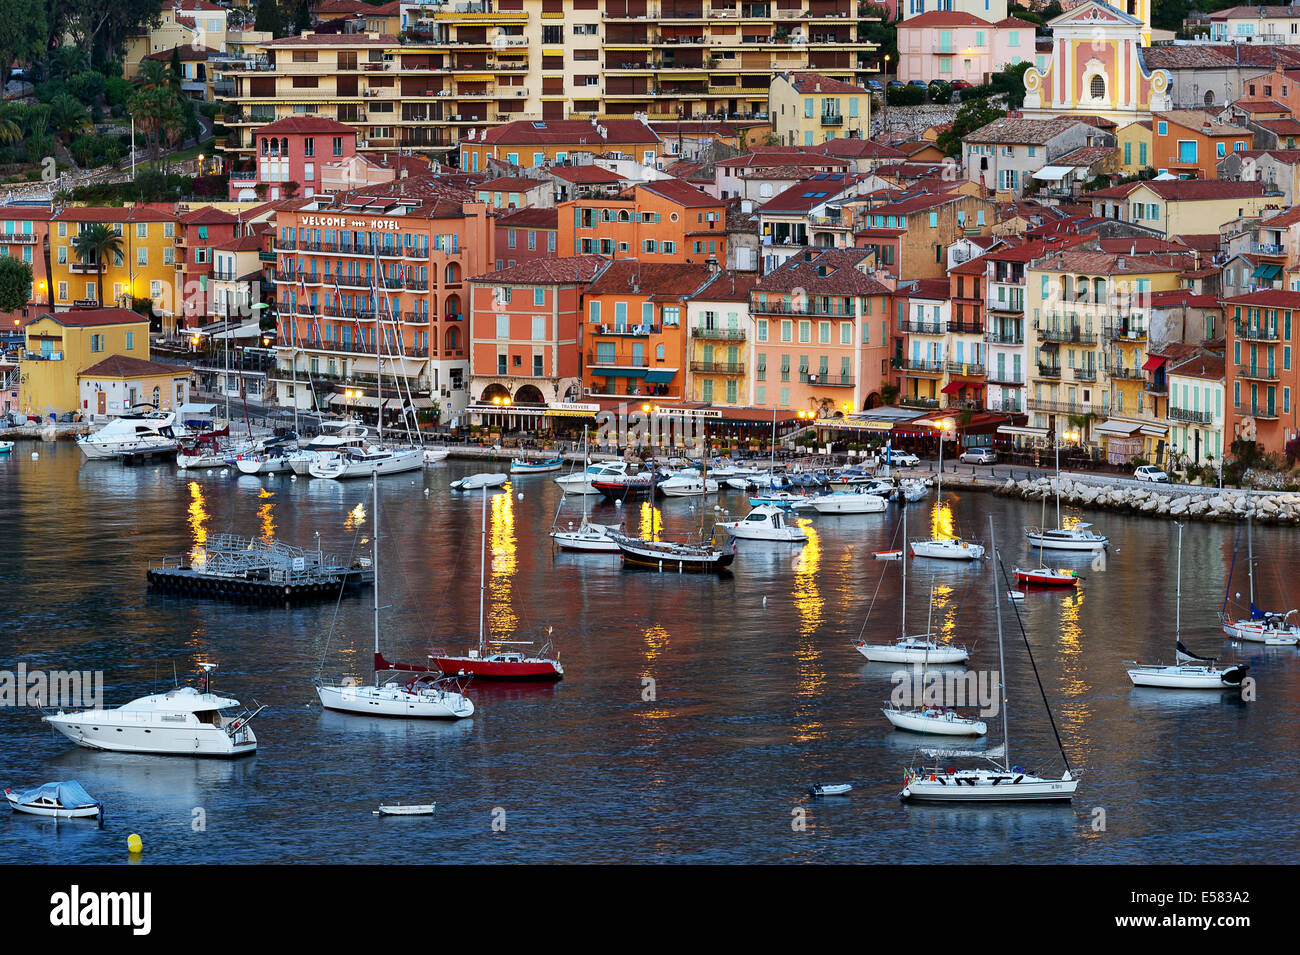 Europe, France, Alpes-Maritimes, Villefrance-sur-Mer. Old town at early morning. Stock Photo